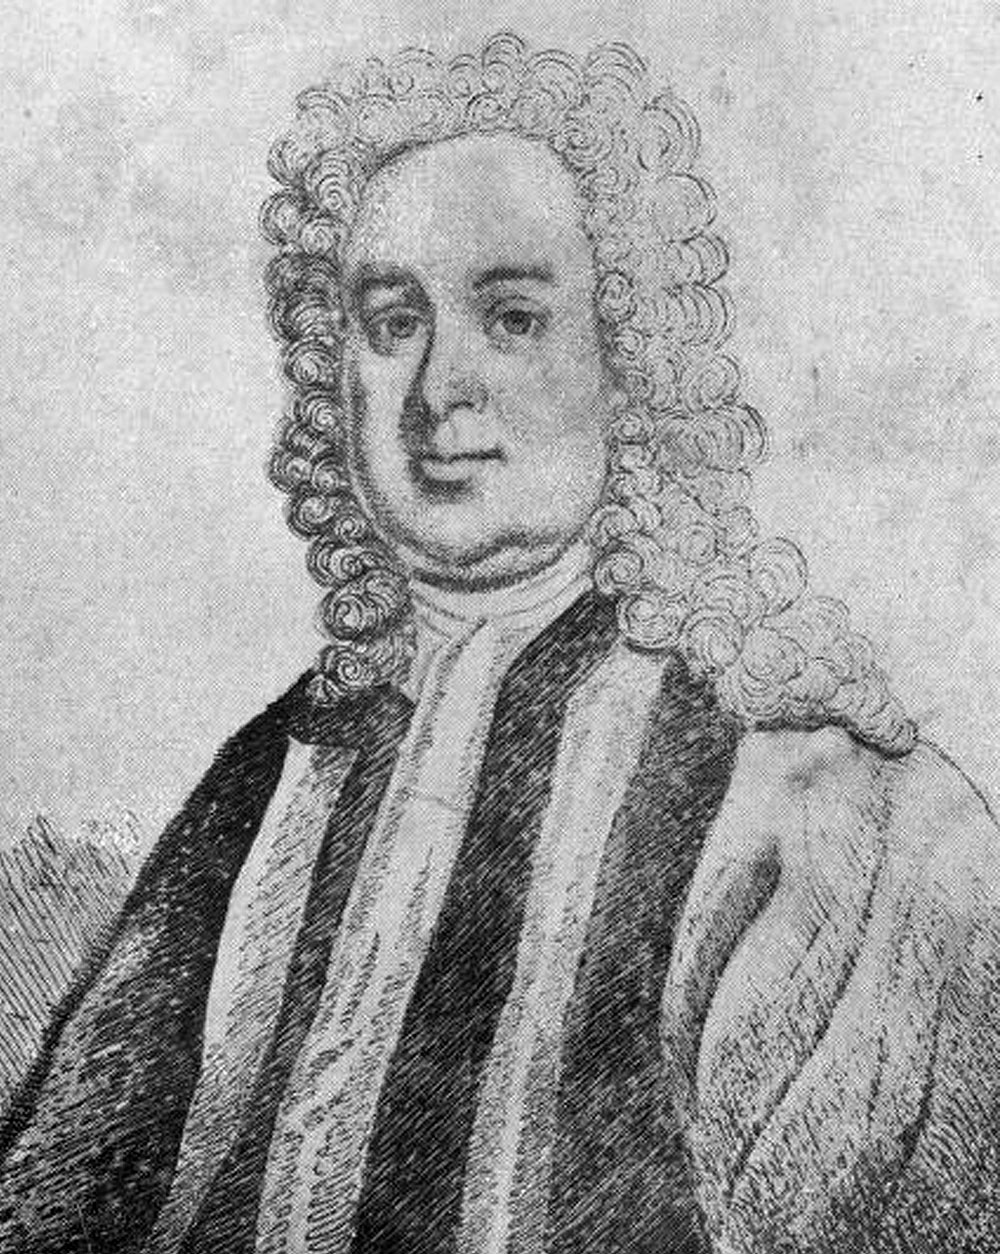 A portrait of Edward Lhuyd, (1660 - 1709), a pioneering linguist and Keeper of the Ashmolean Museum in Oxford.